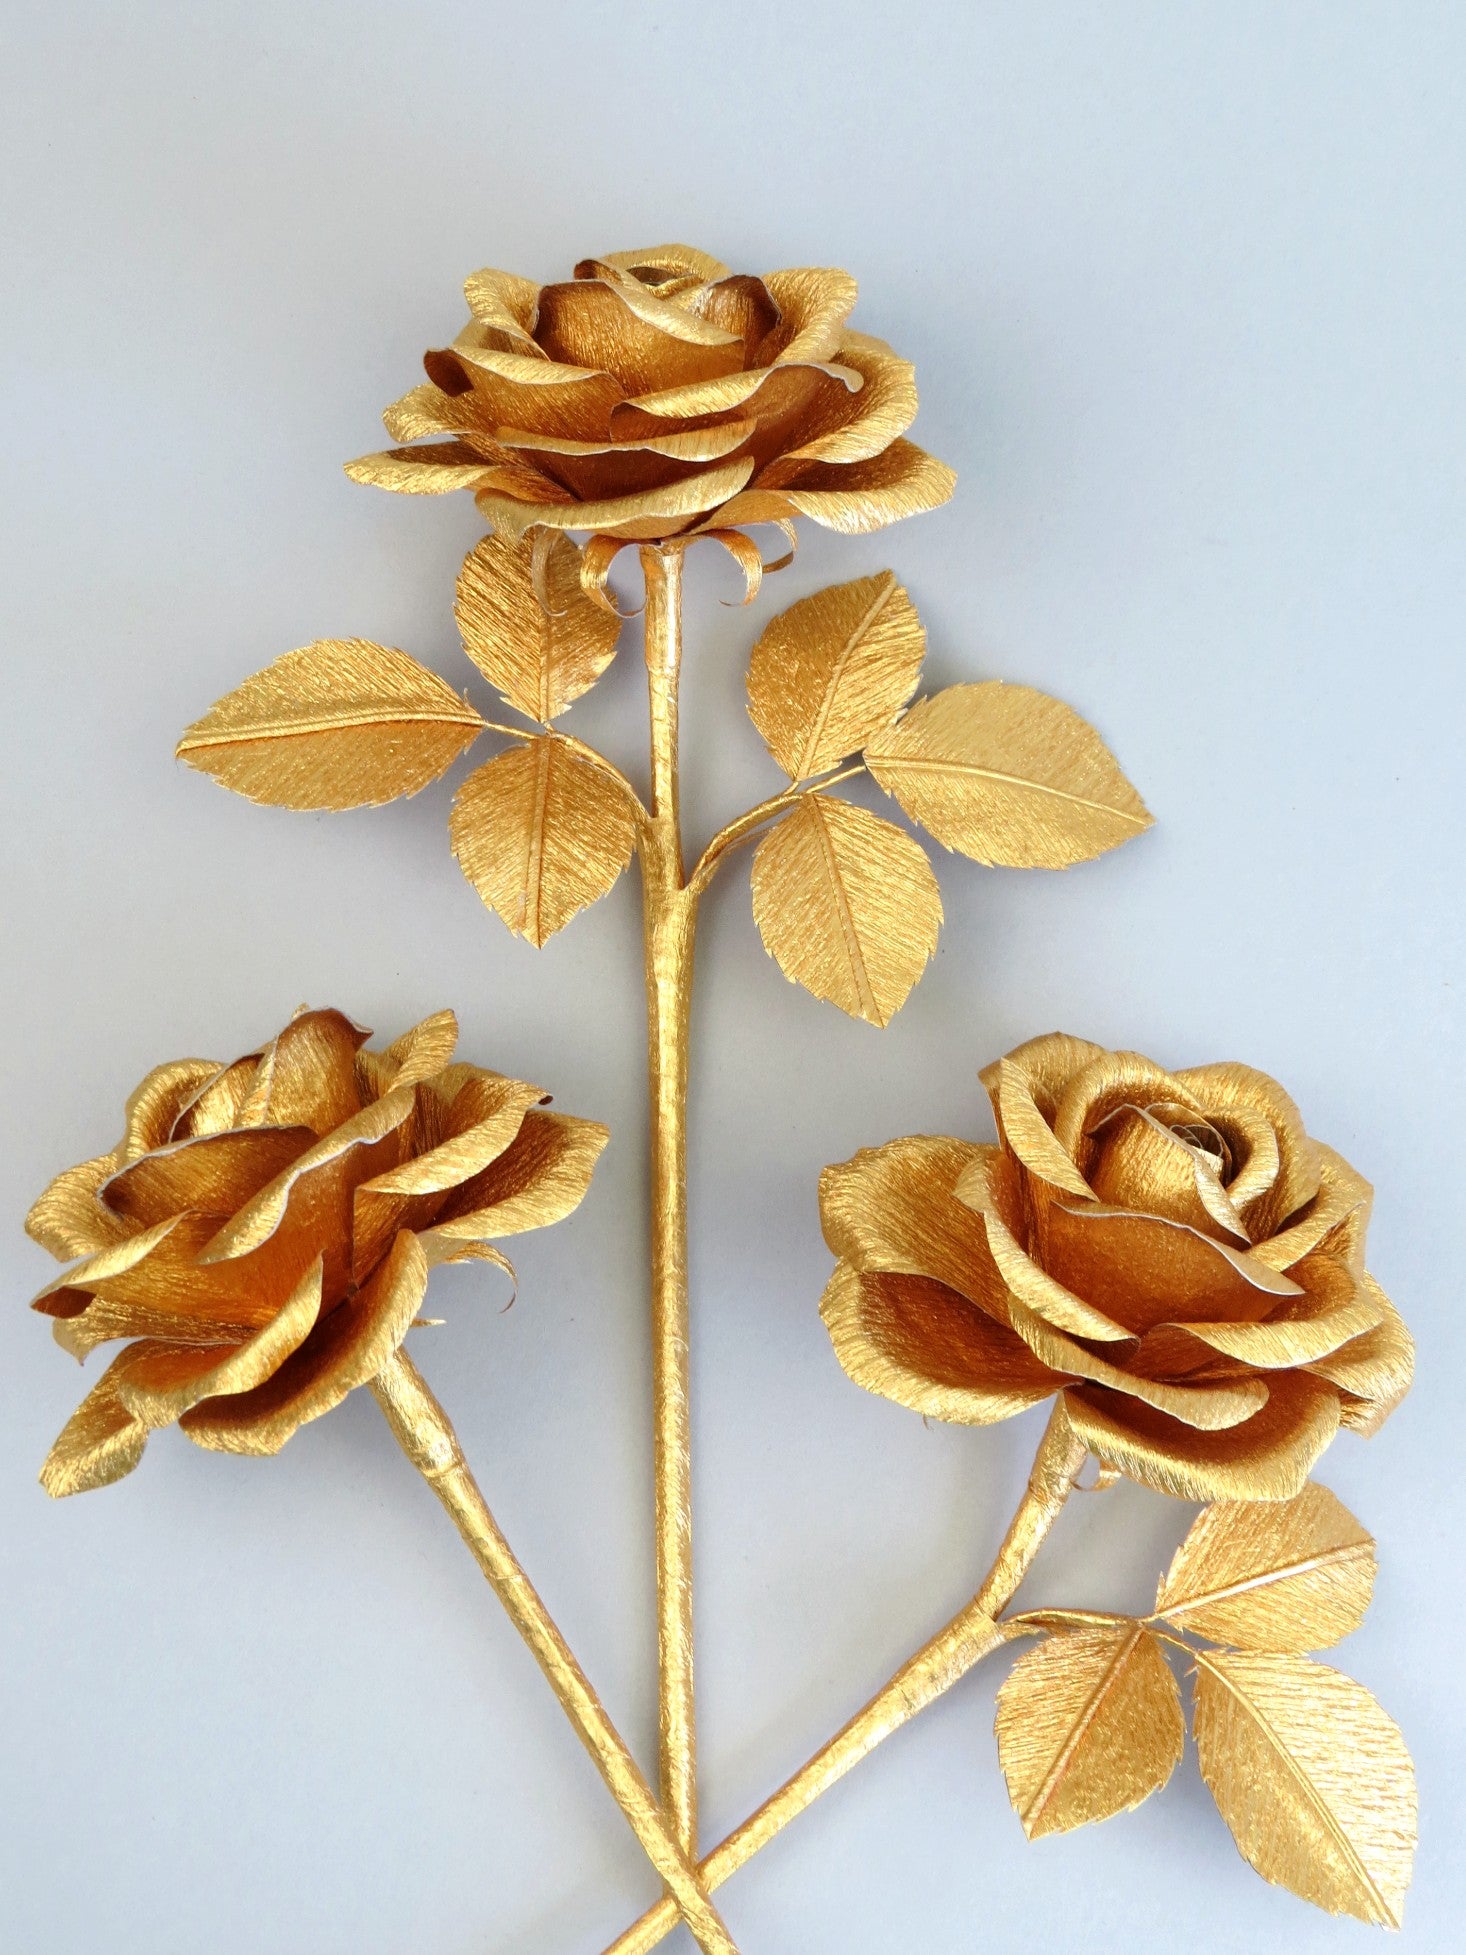 Three gold crepe paper roses randomly lying next to each other on a light grey background. The left rose is leafless, the middle rose has six gold leaves attached and the right rose has three gold leaves.